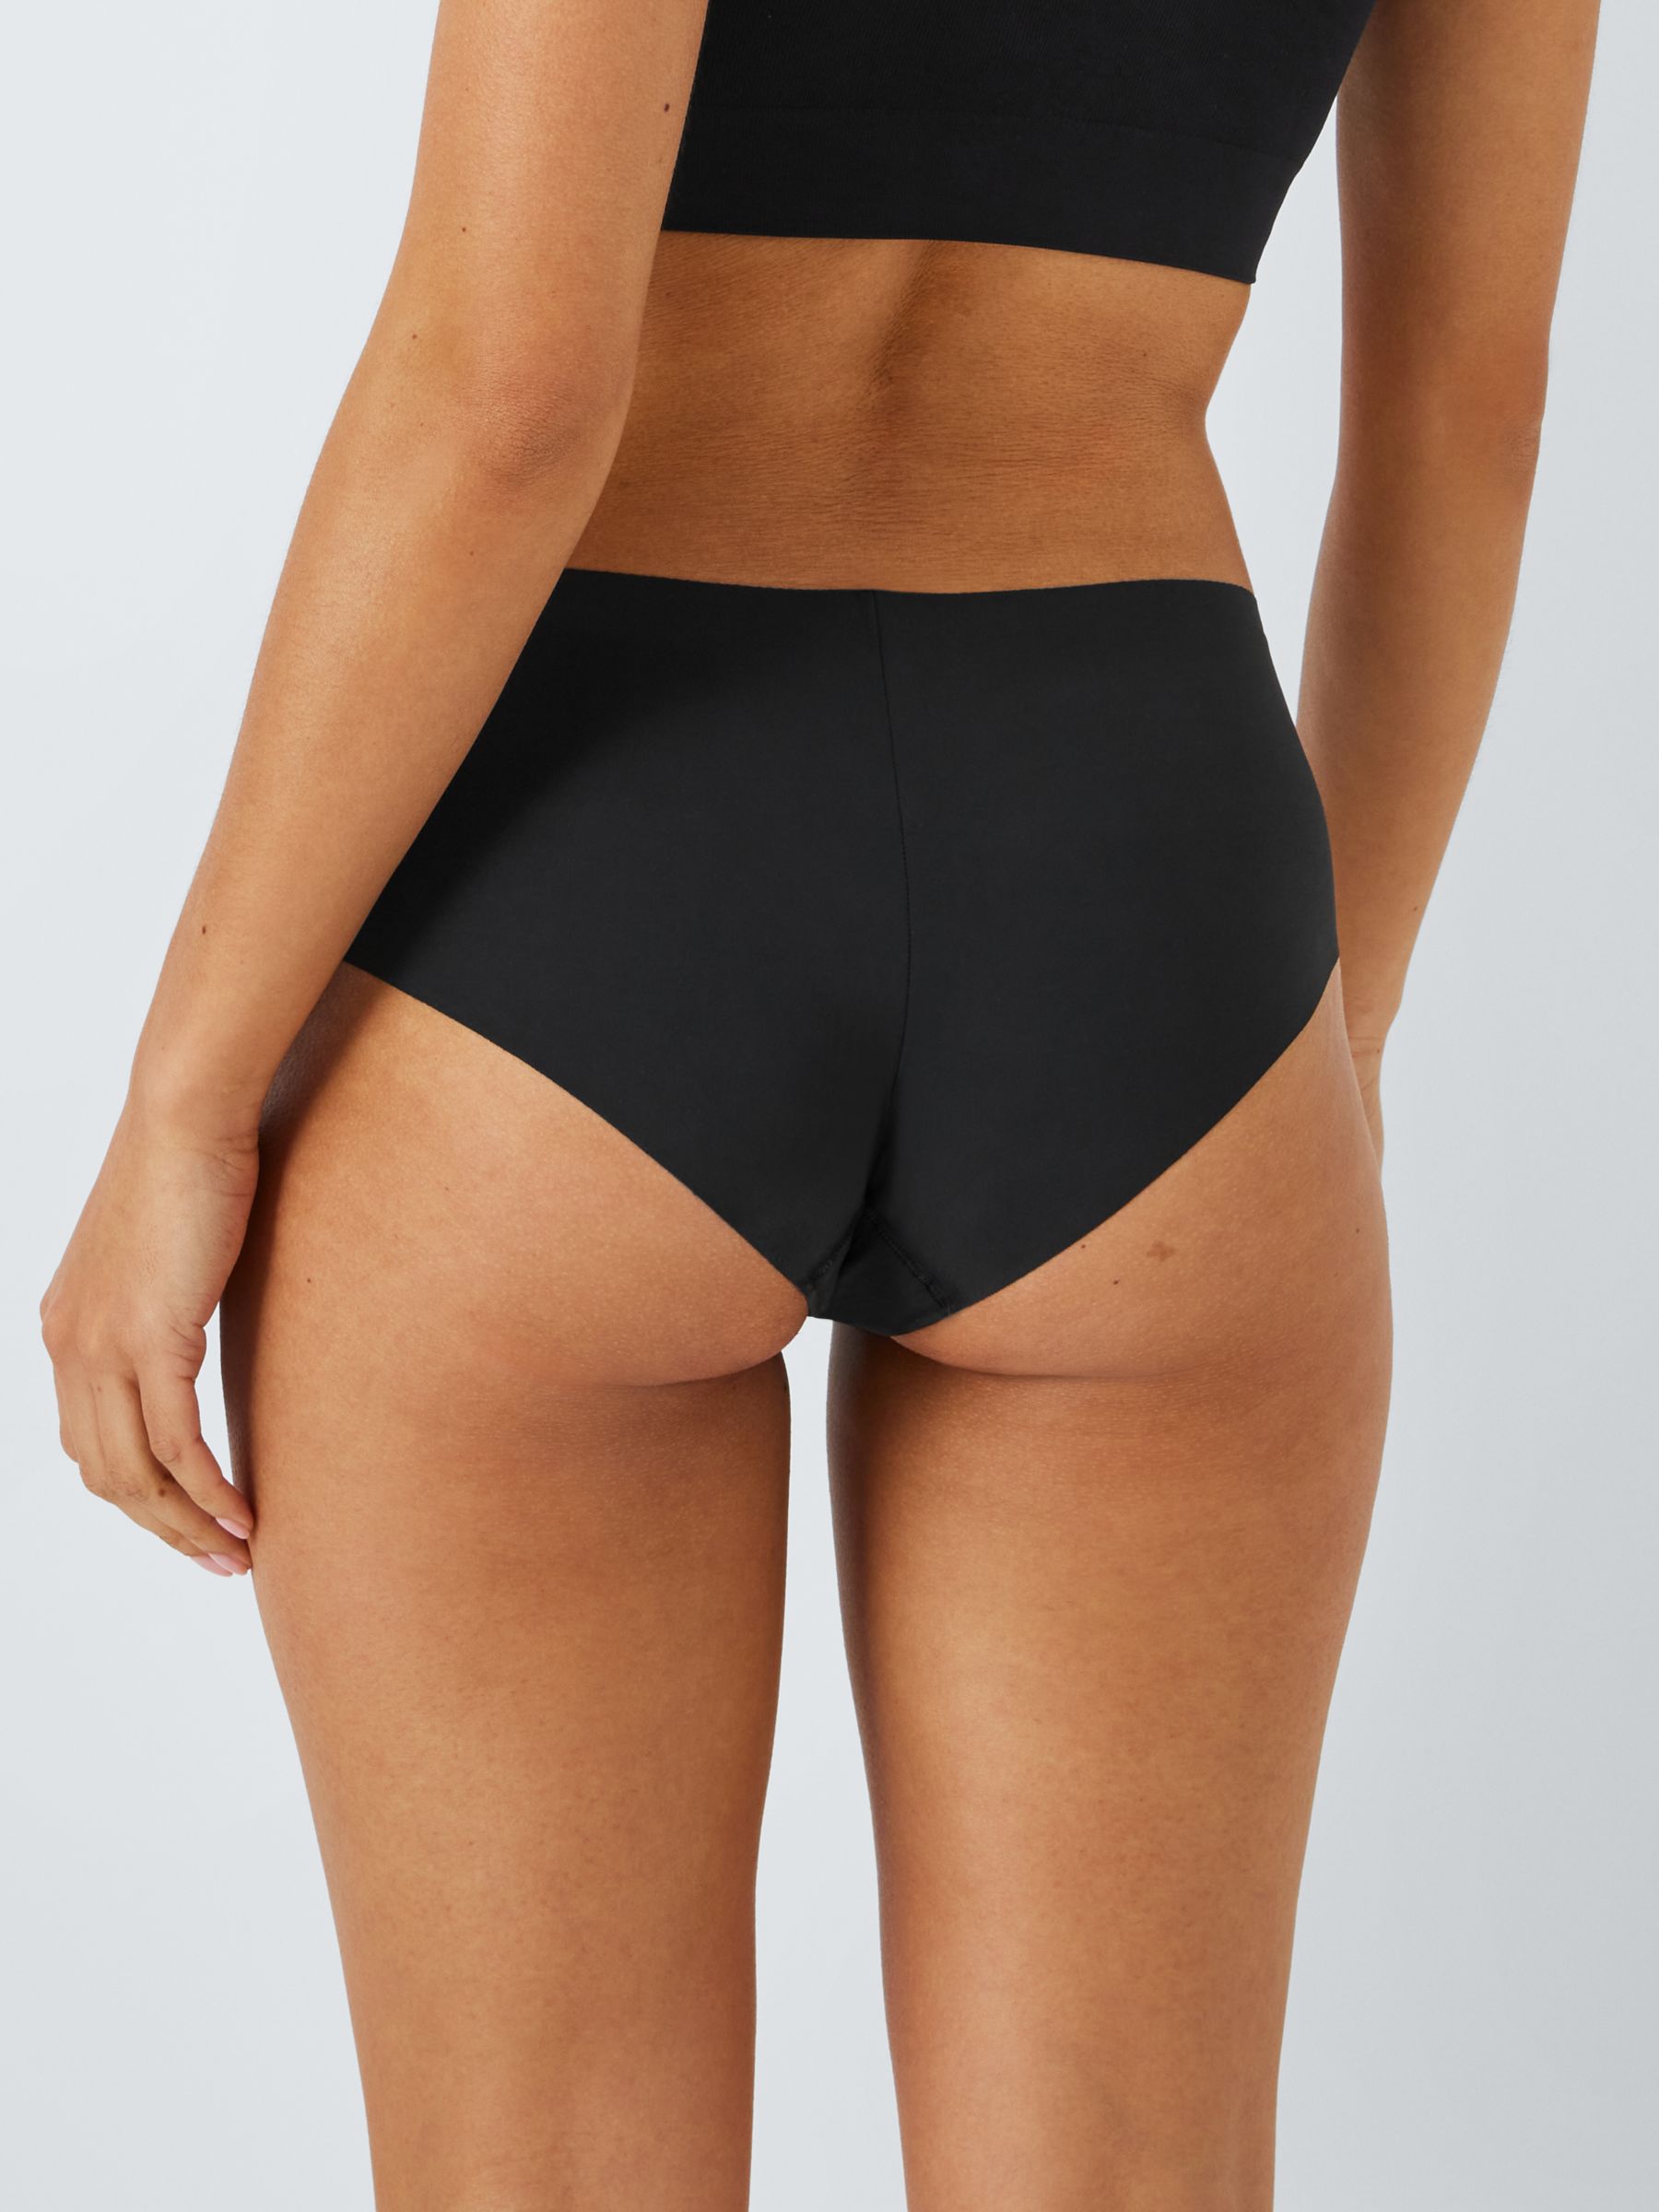 John Lewis ANYDAY No VPL Short Knickers, Pack of 3, Black, 8